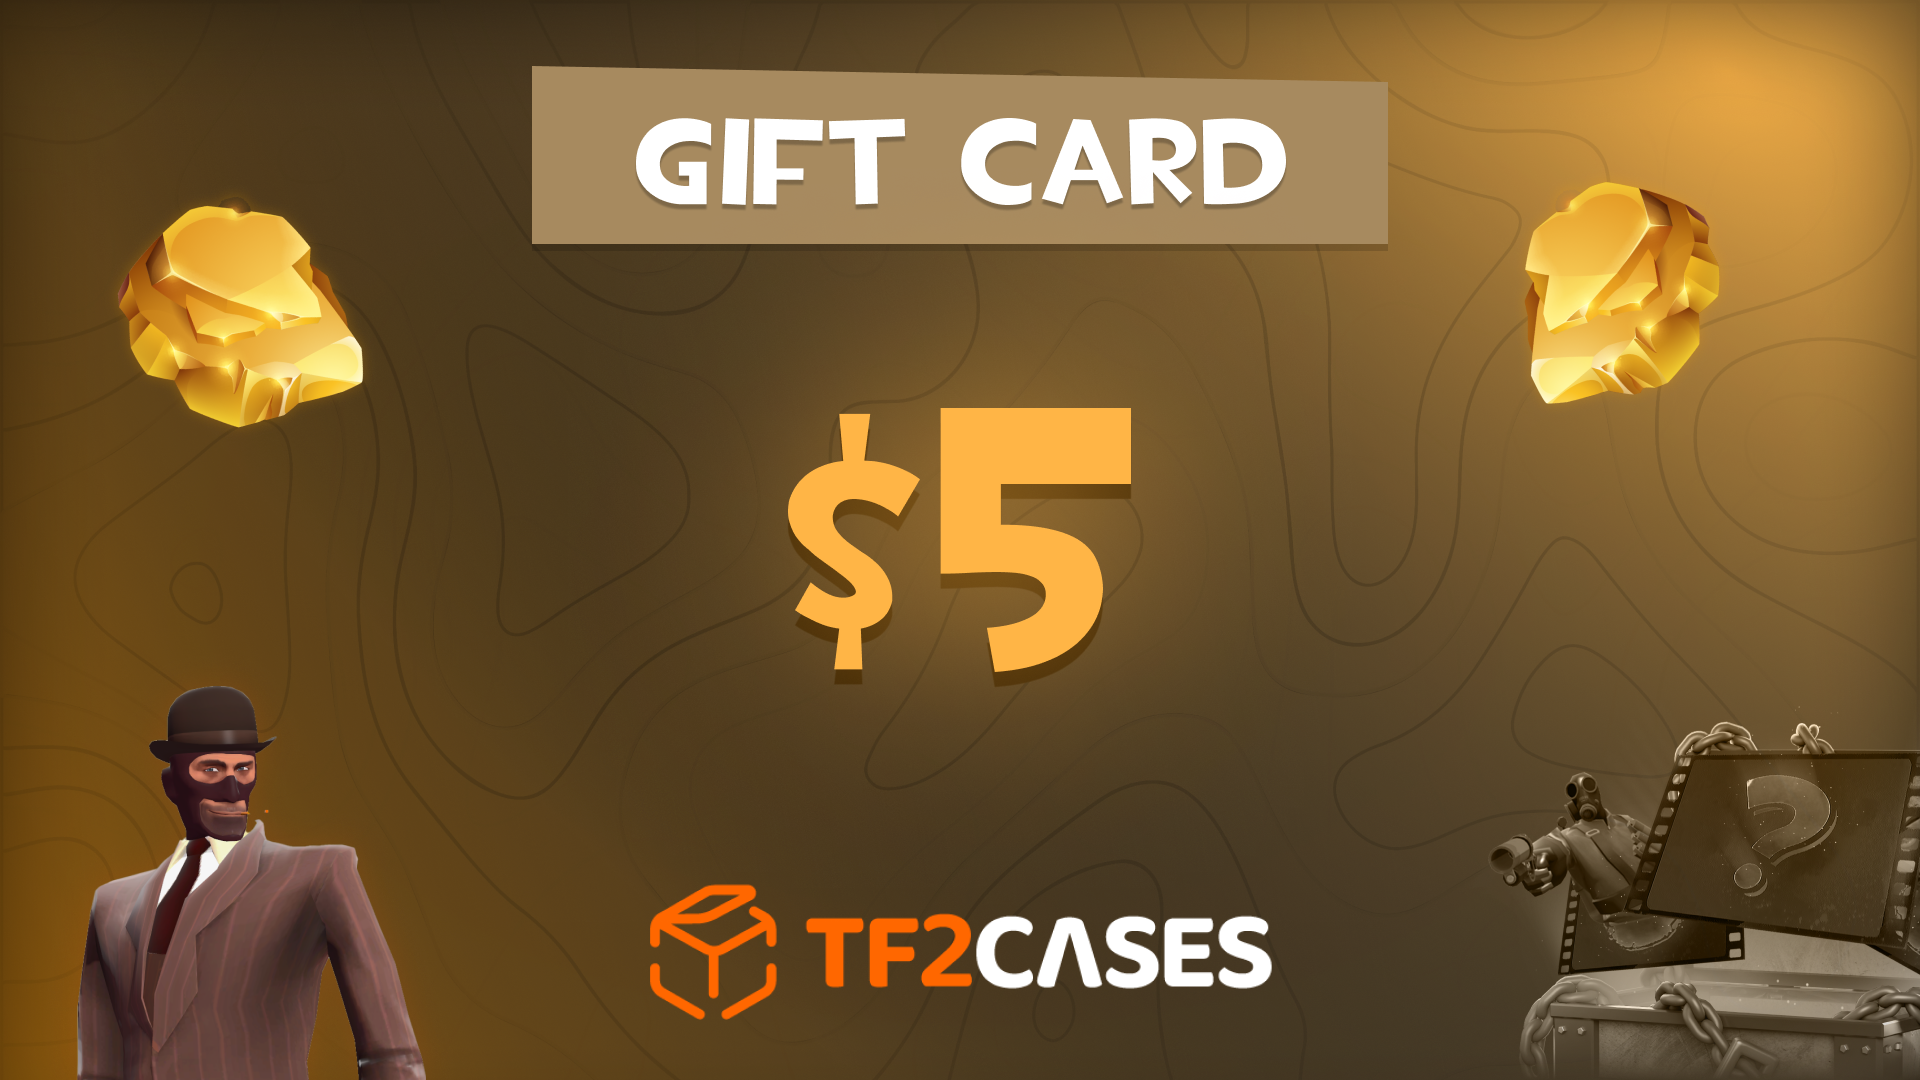 TF2CASES.com $5 Gift Card 5.65 $